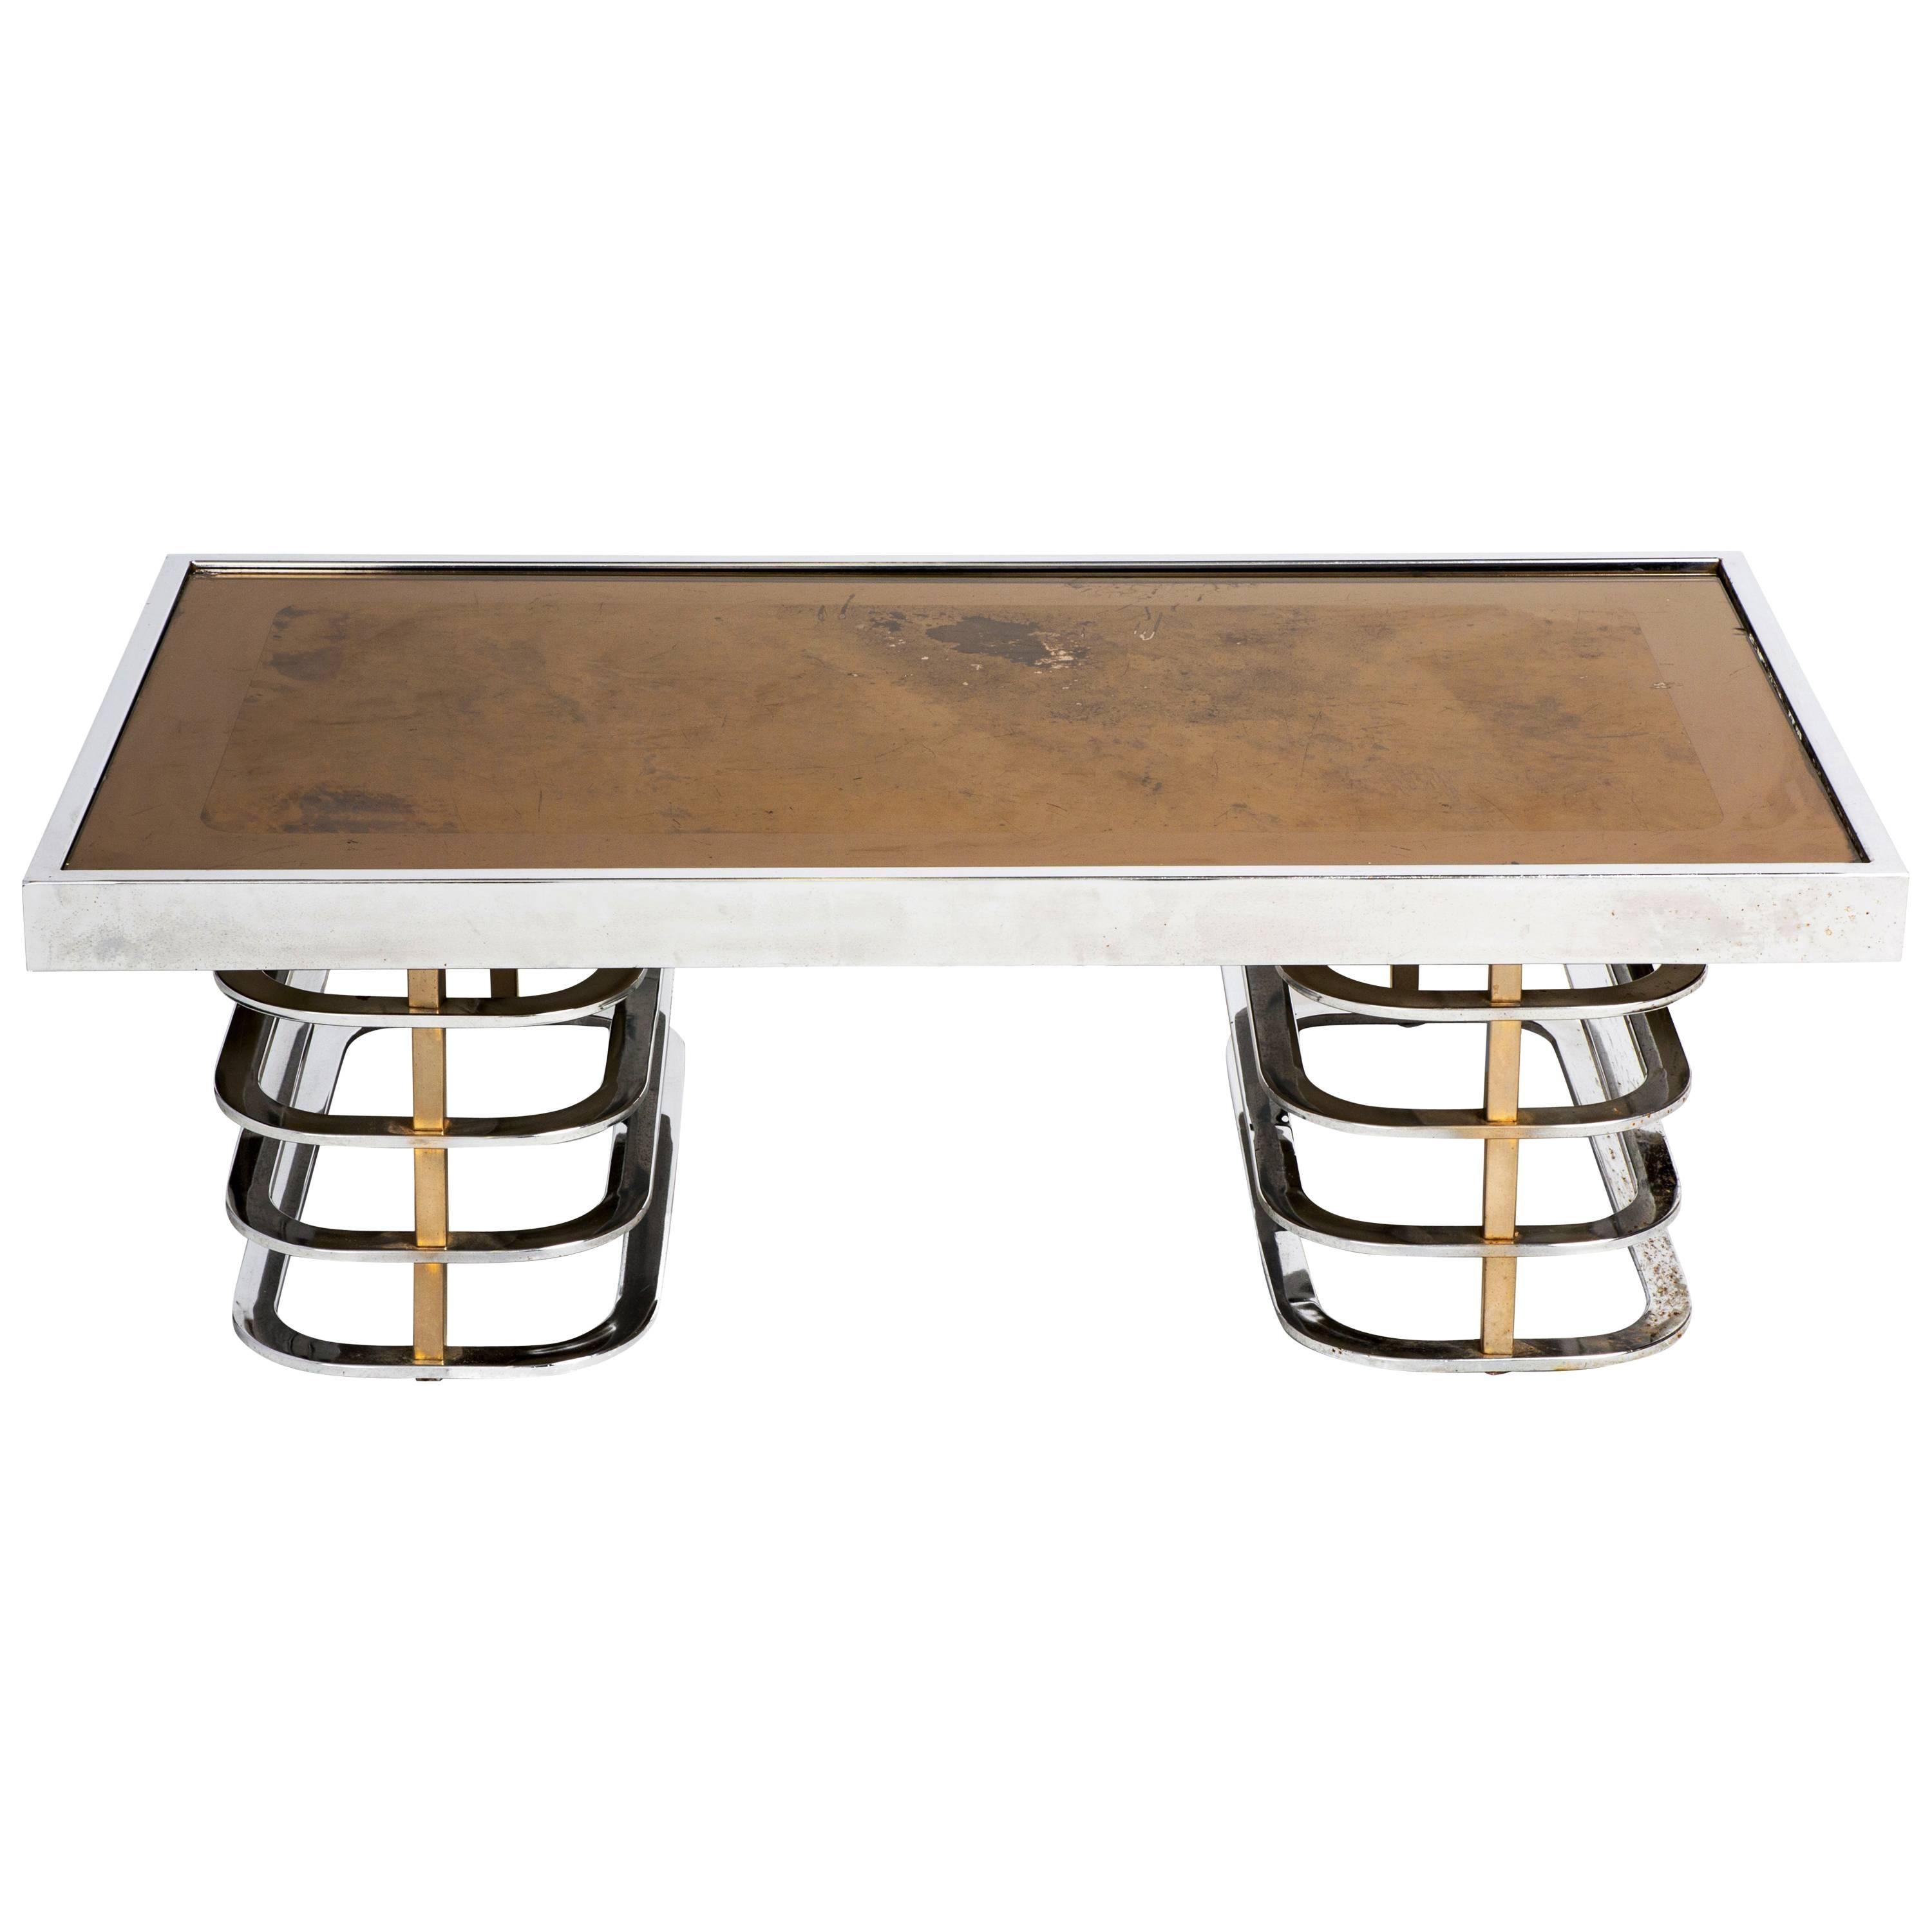 Vintage French Chrome and Brass Coffee Table